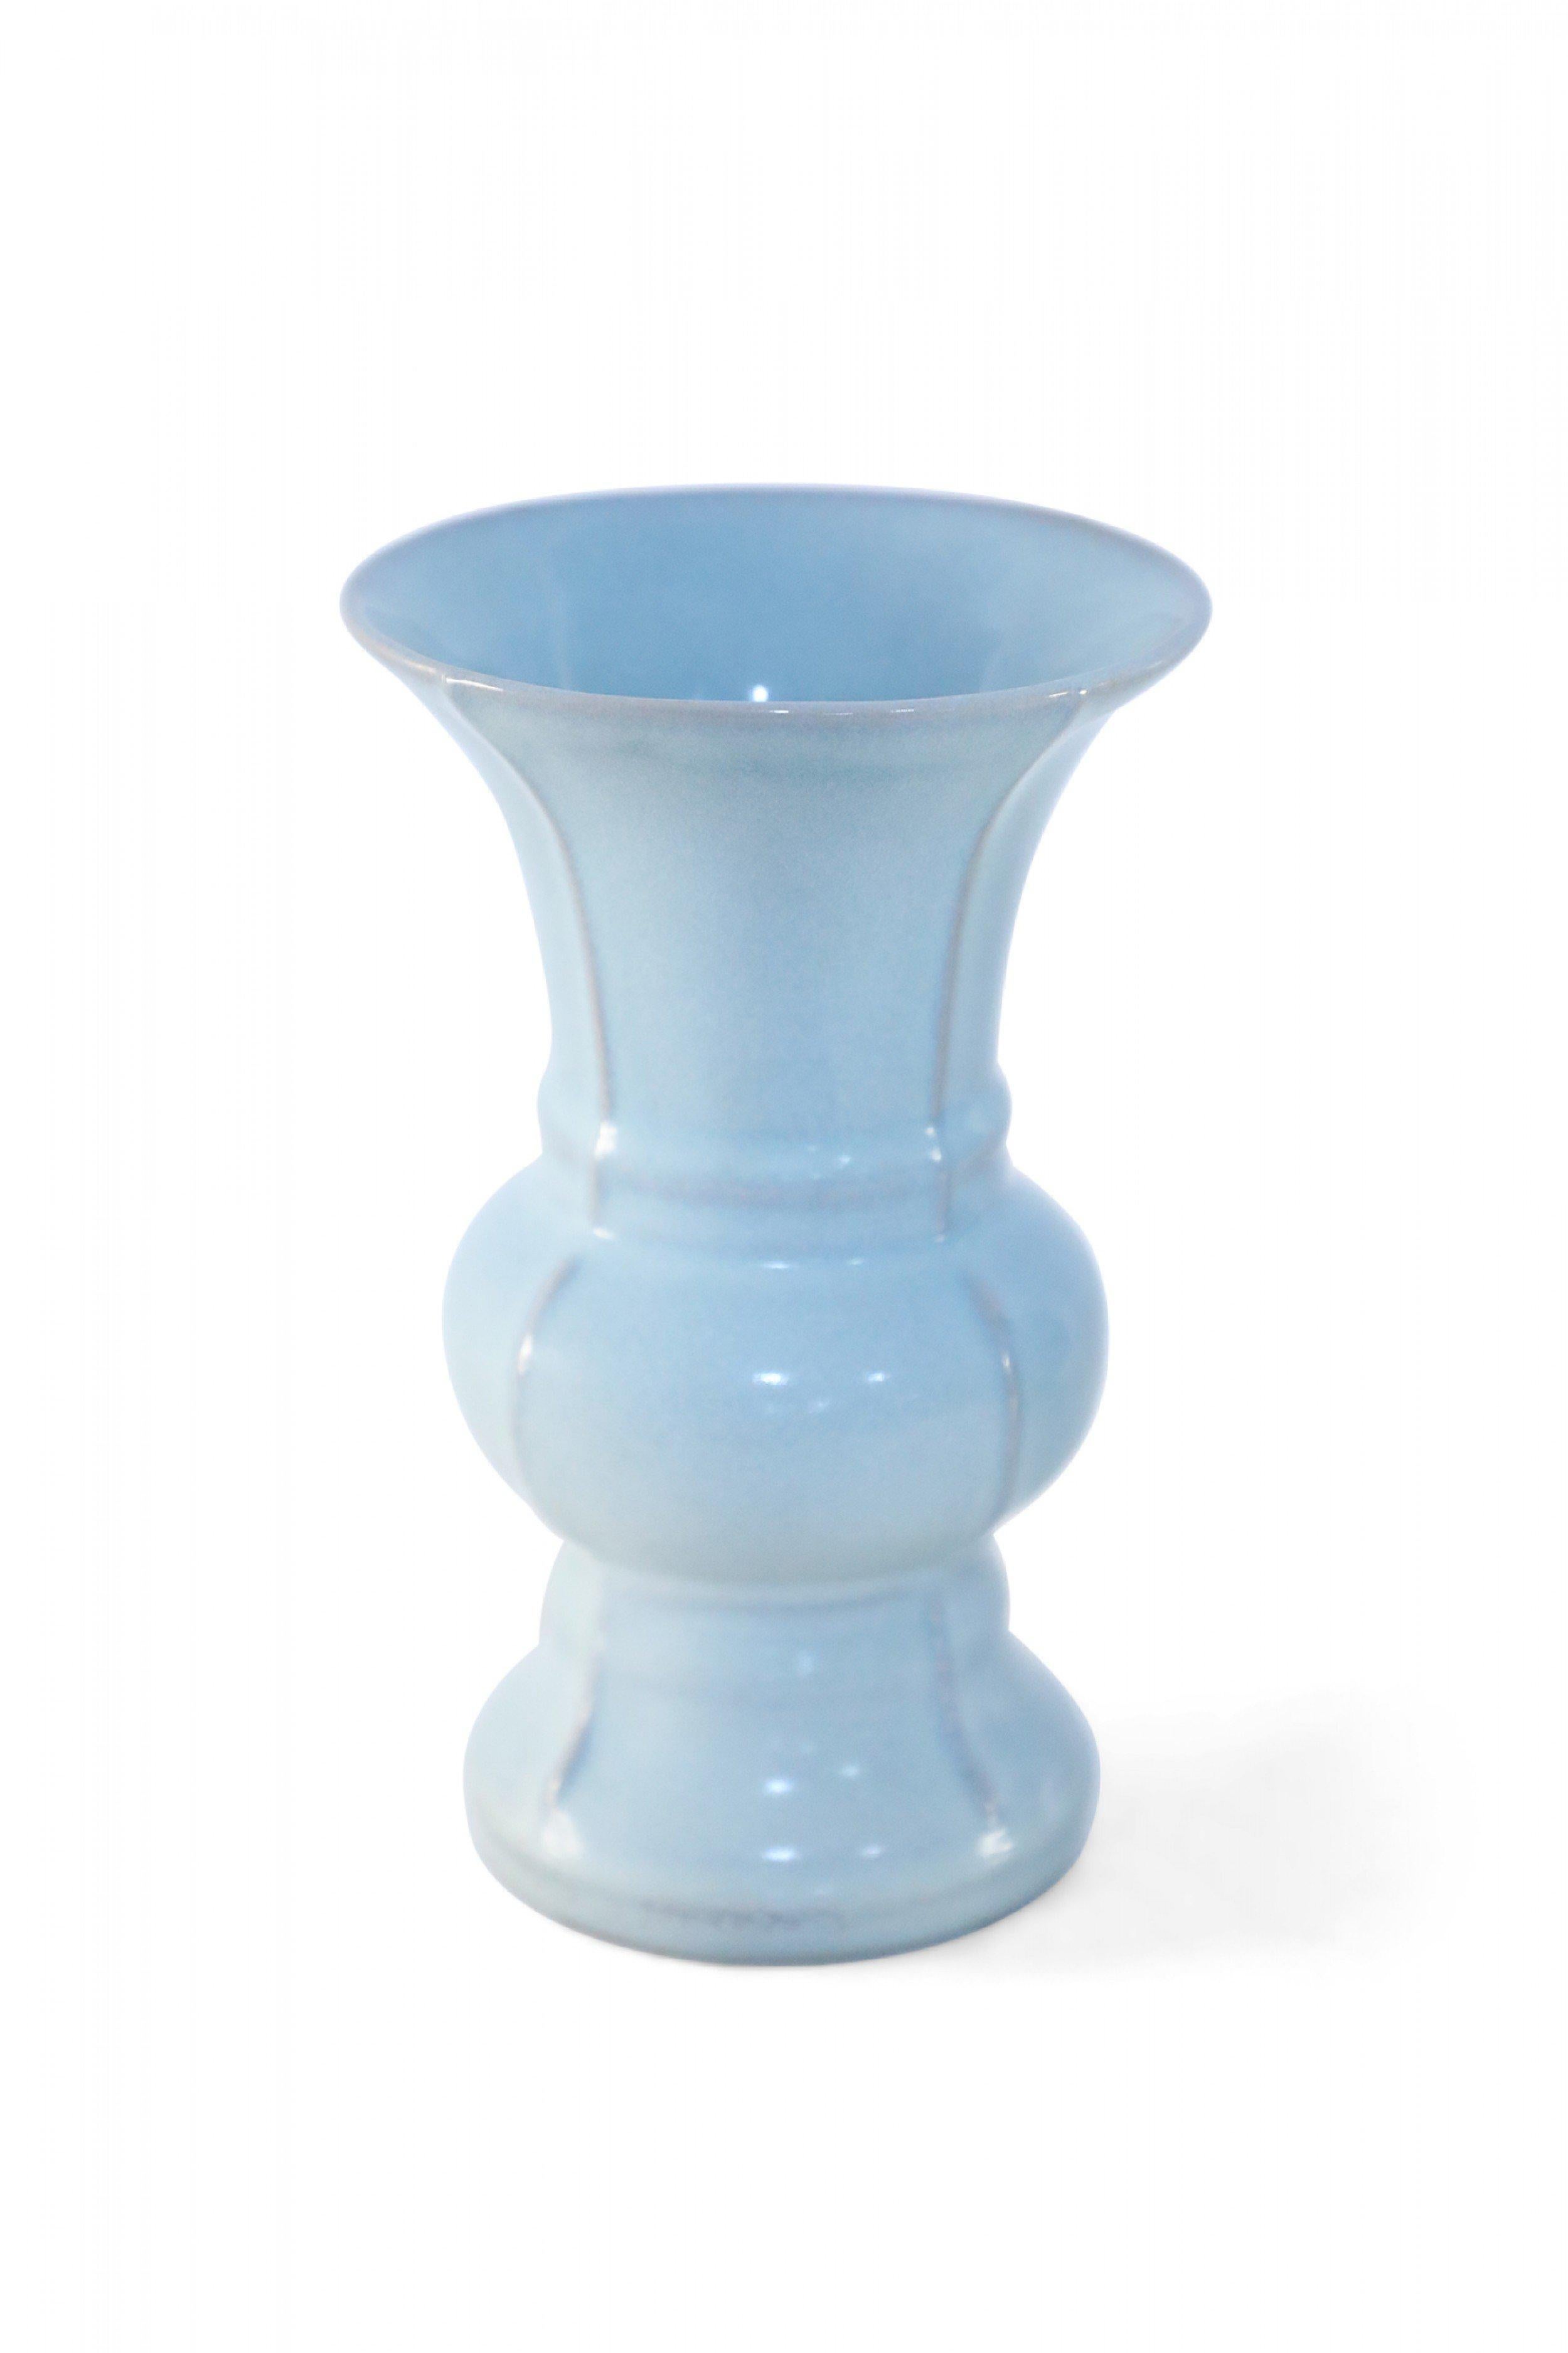 Chinese (20th Century) light blue porcelain vase with a beaker shape and crackled finish.
    